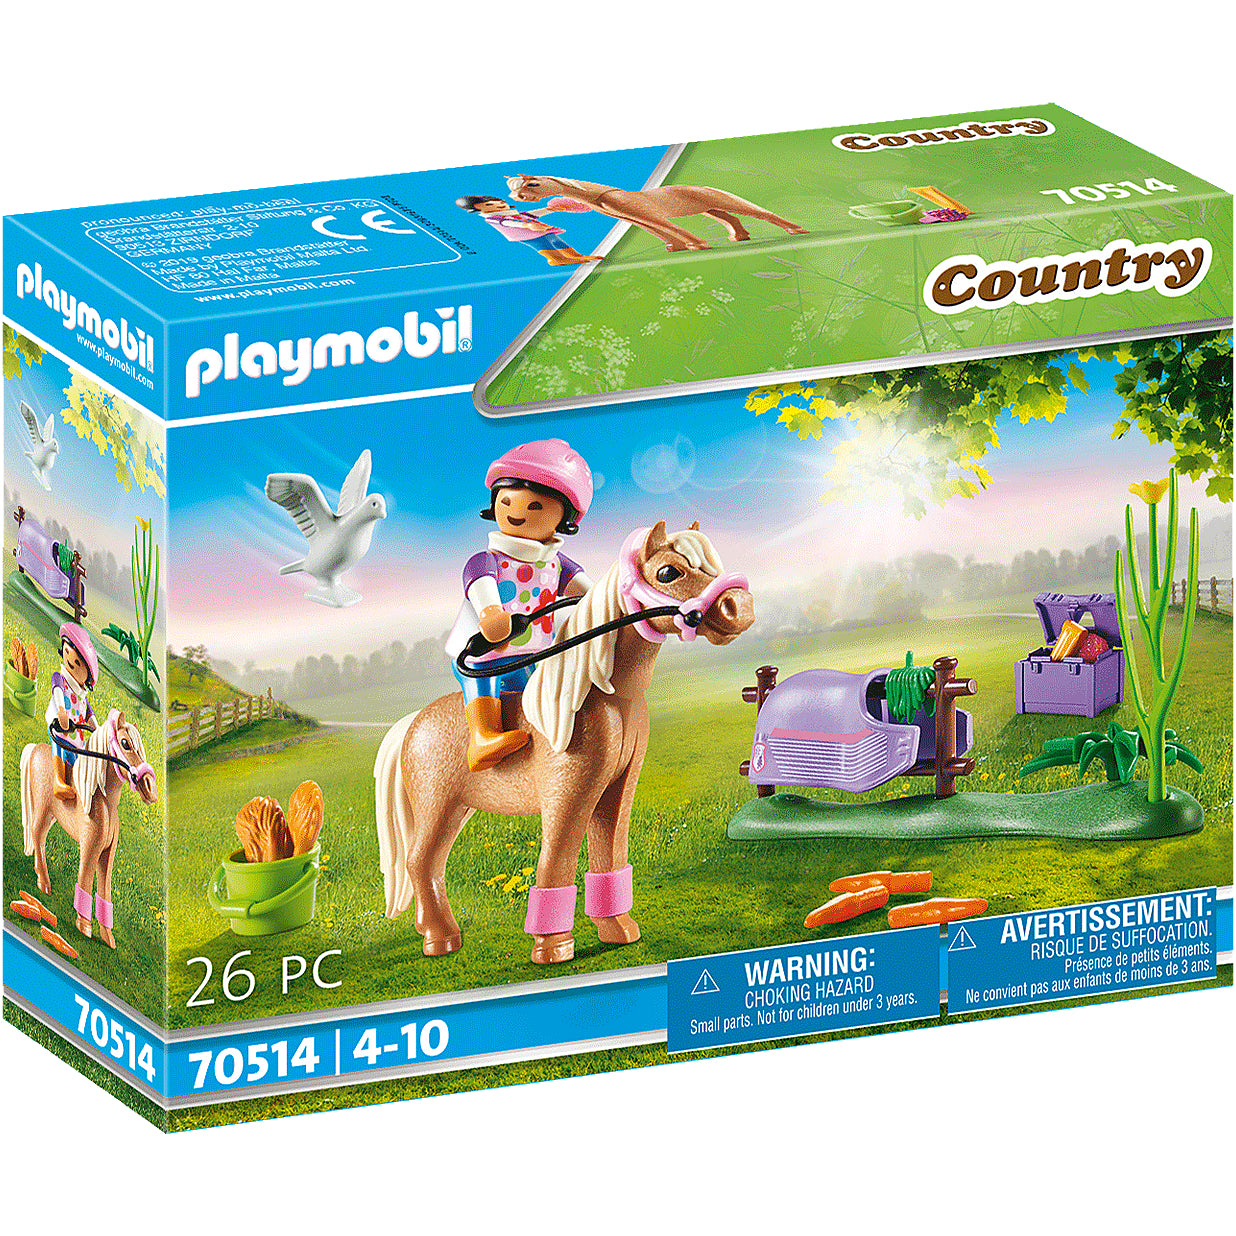 Playmobil Icelandic Pony Playscapes